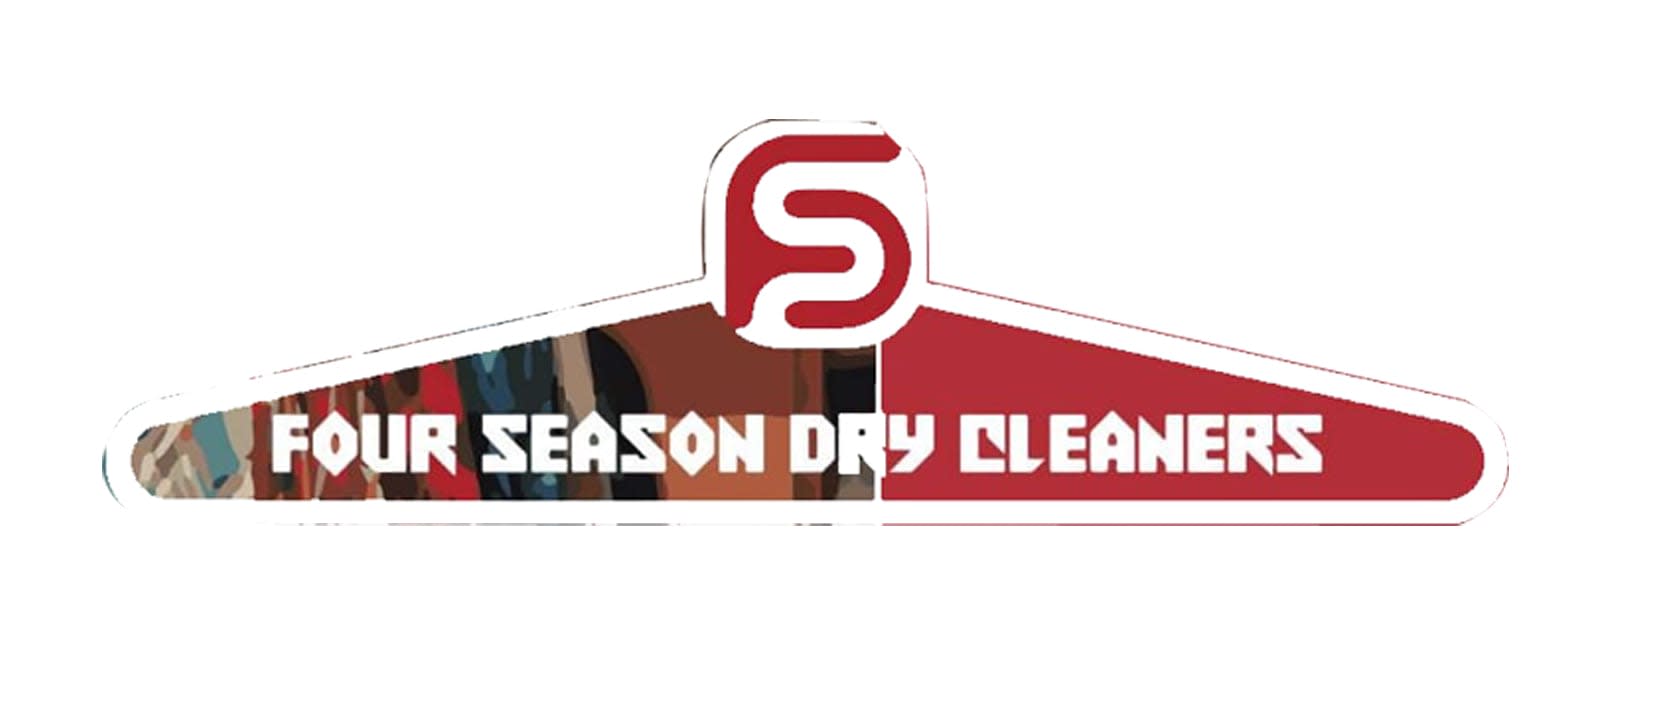 Four Season Dry Cleaners